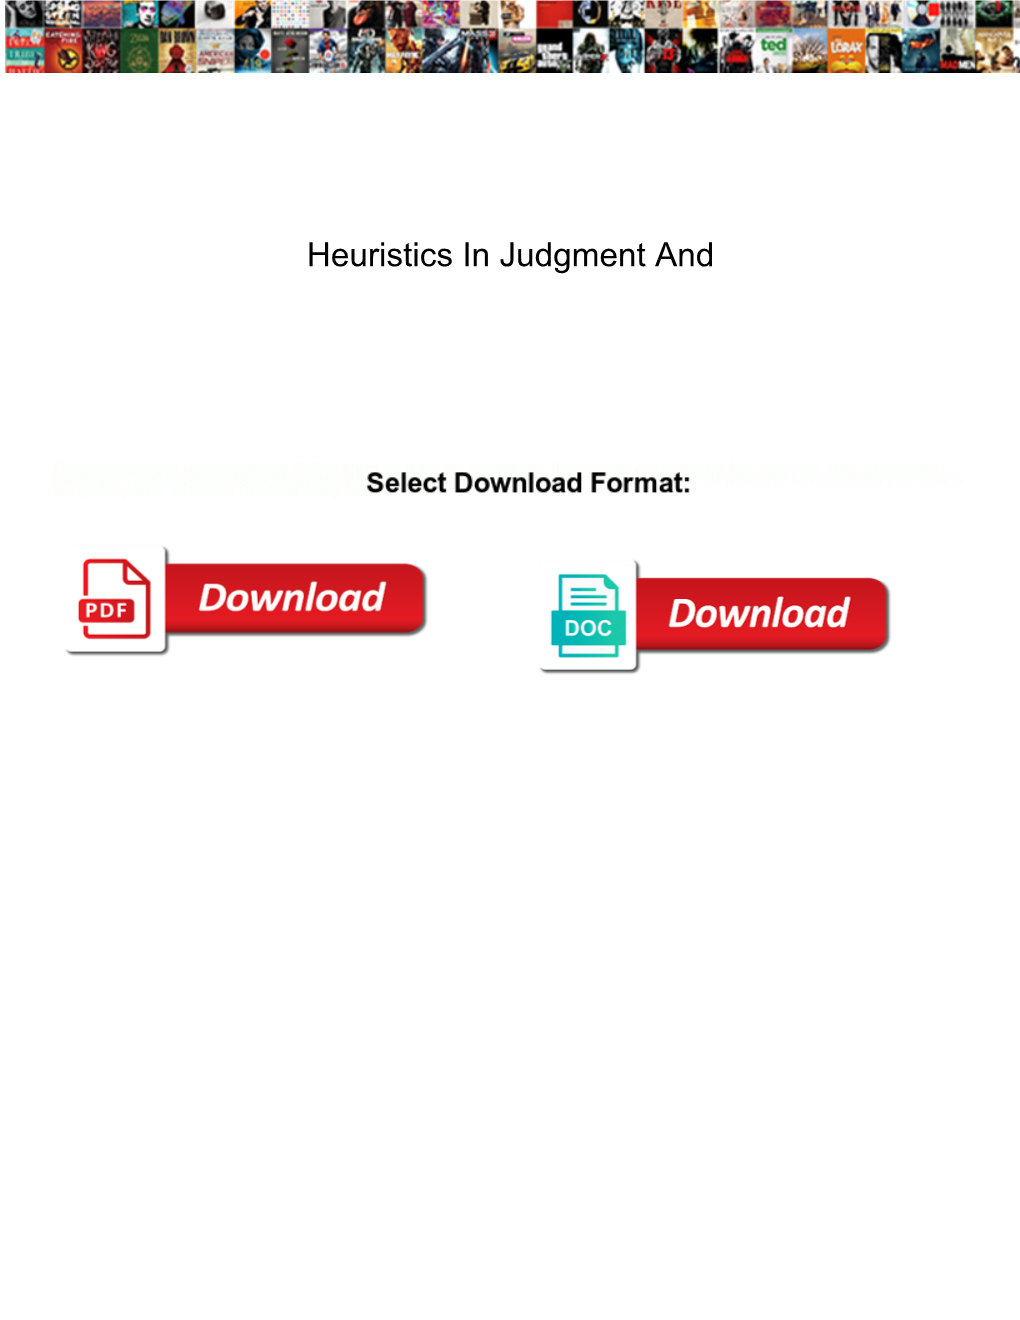 Heuristics in Judgment And